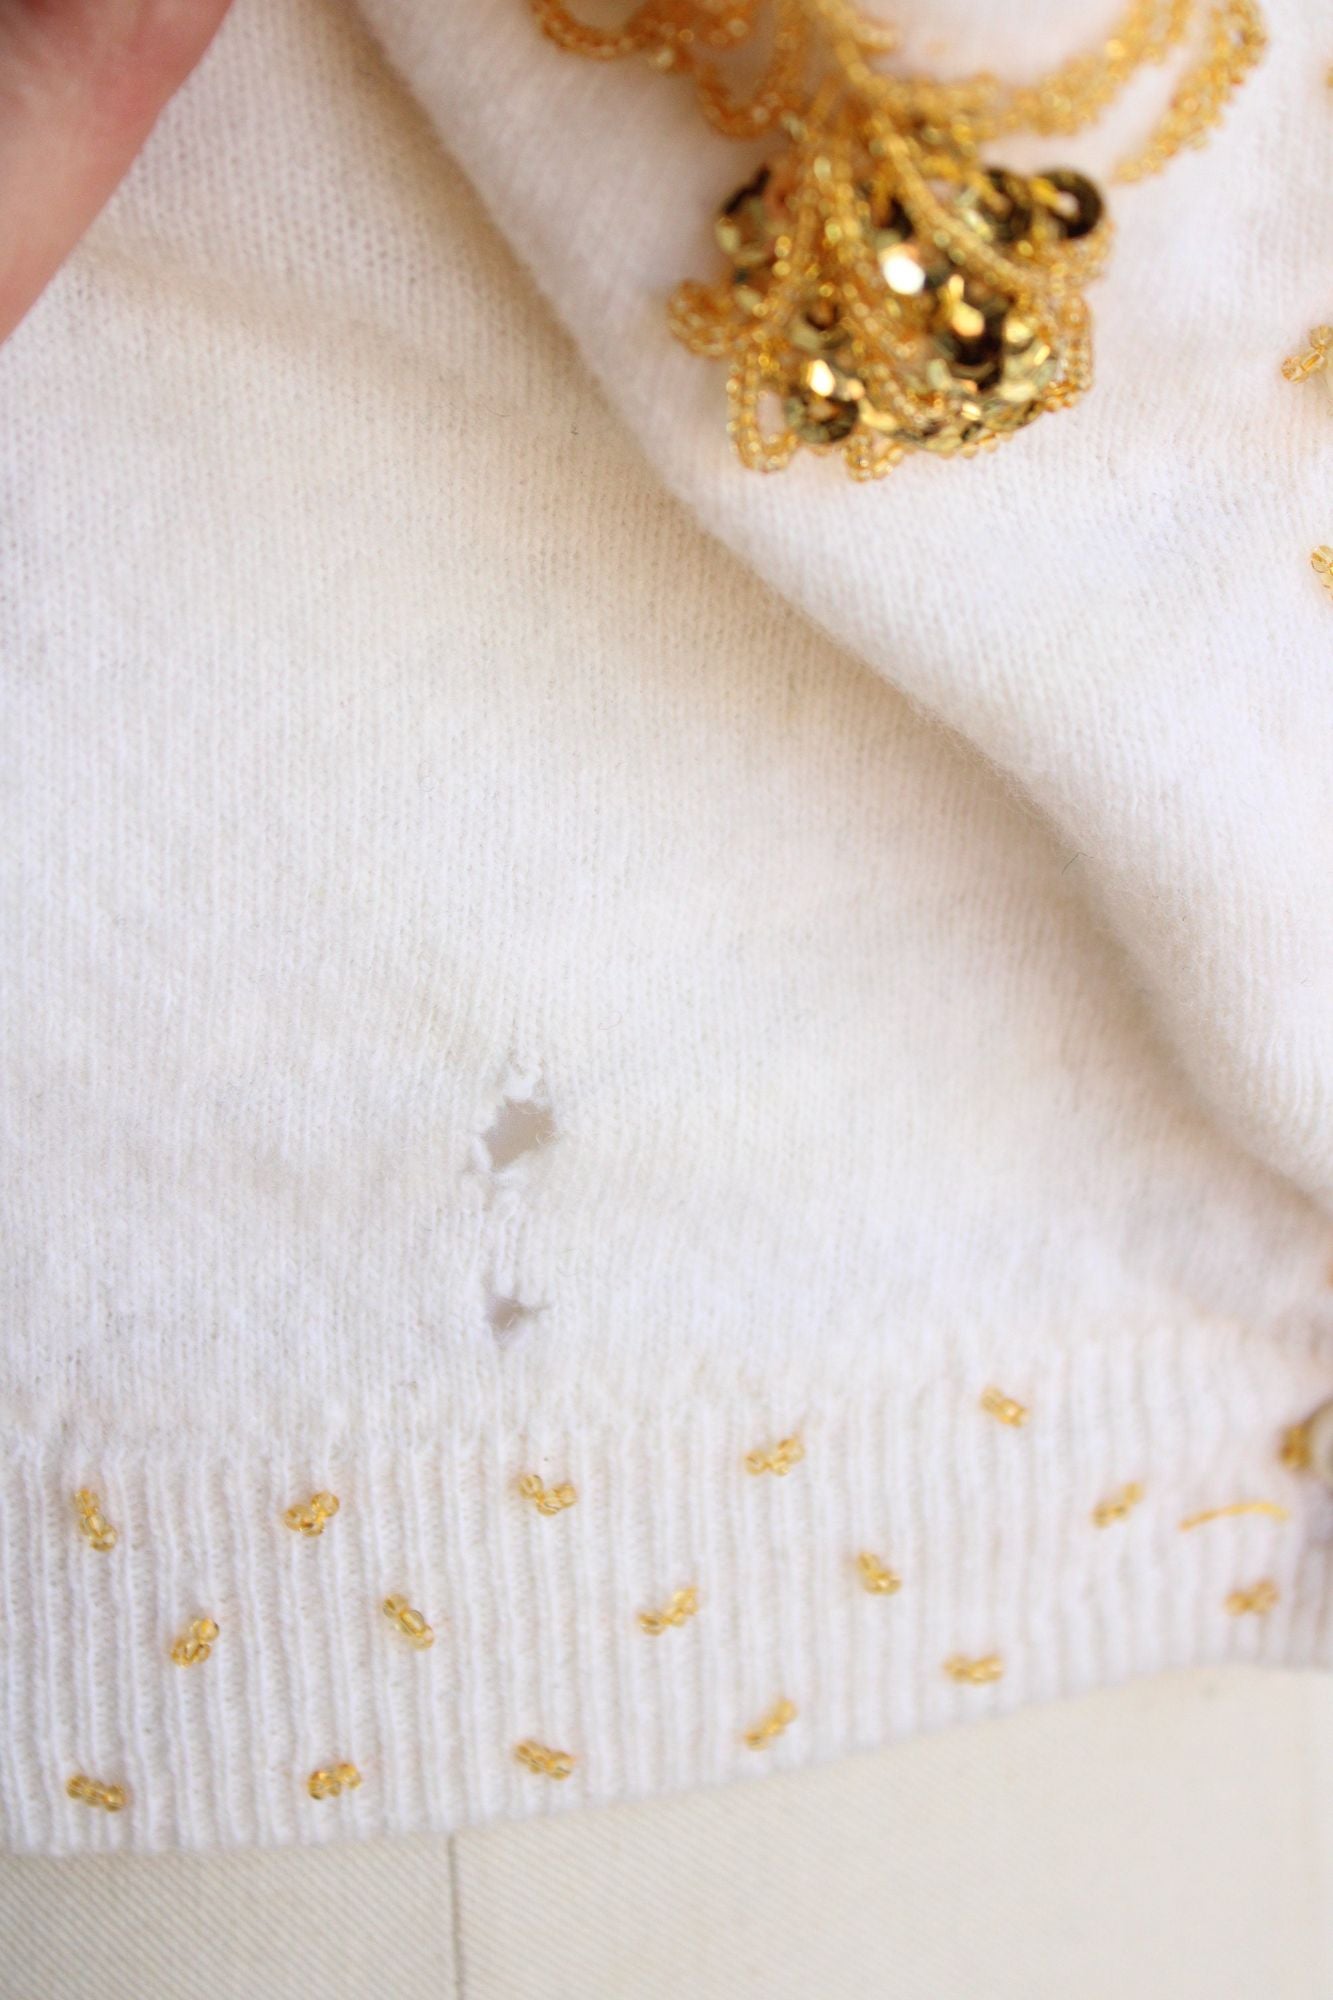 Vintage 1960s CReam with Gold Beaded Lambswool Sweater,